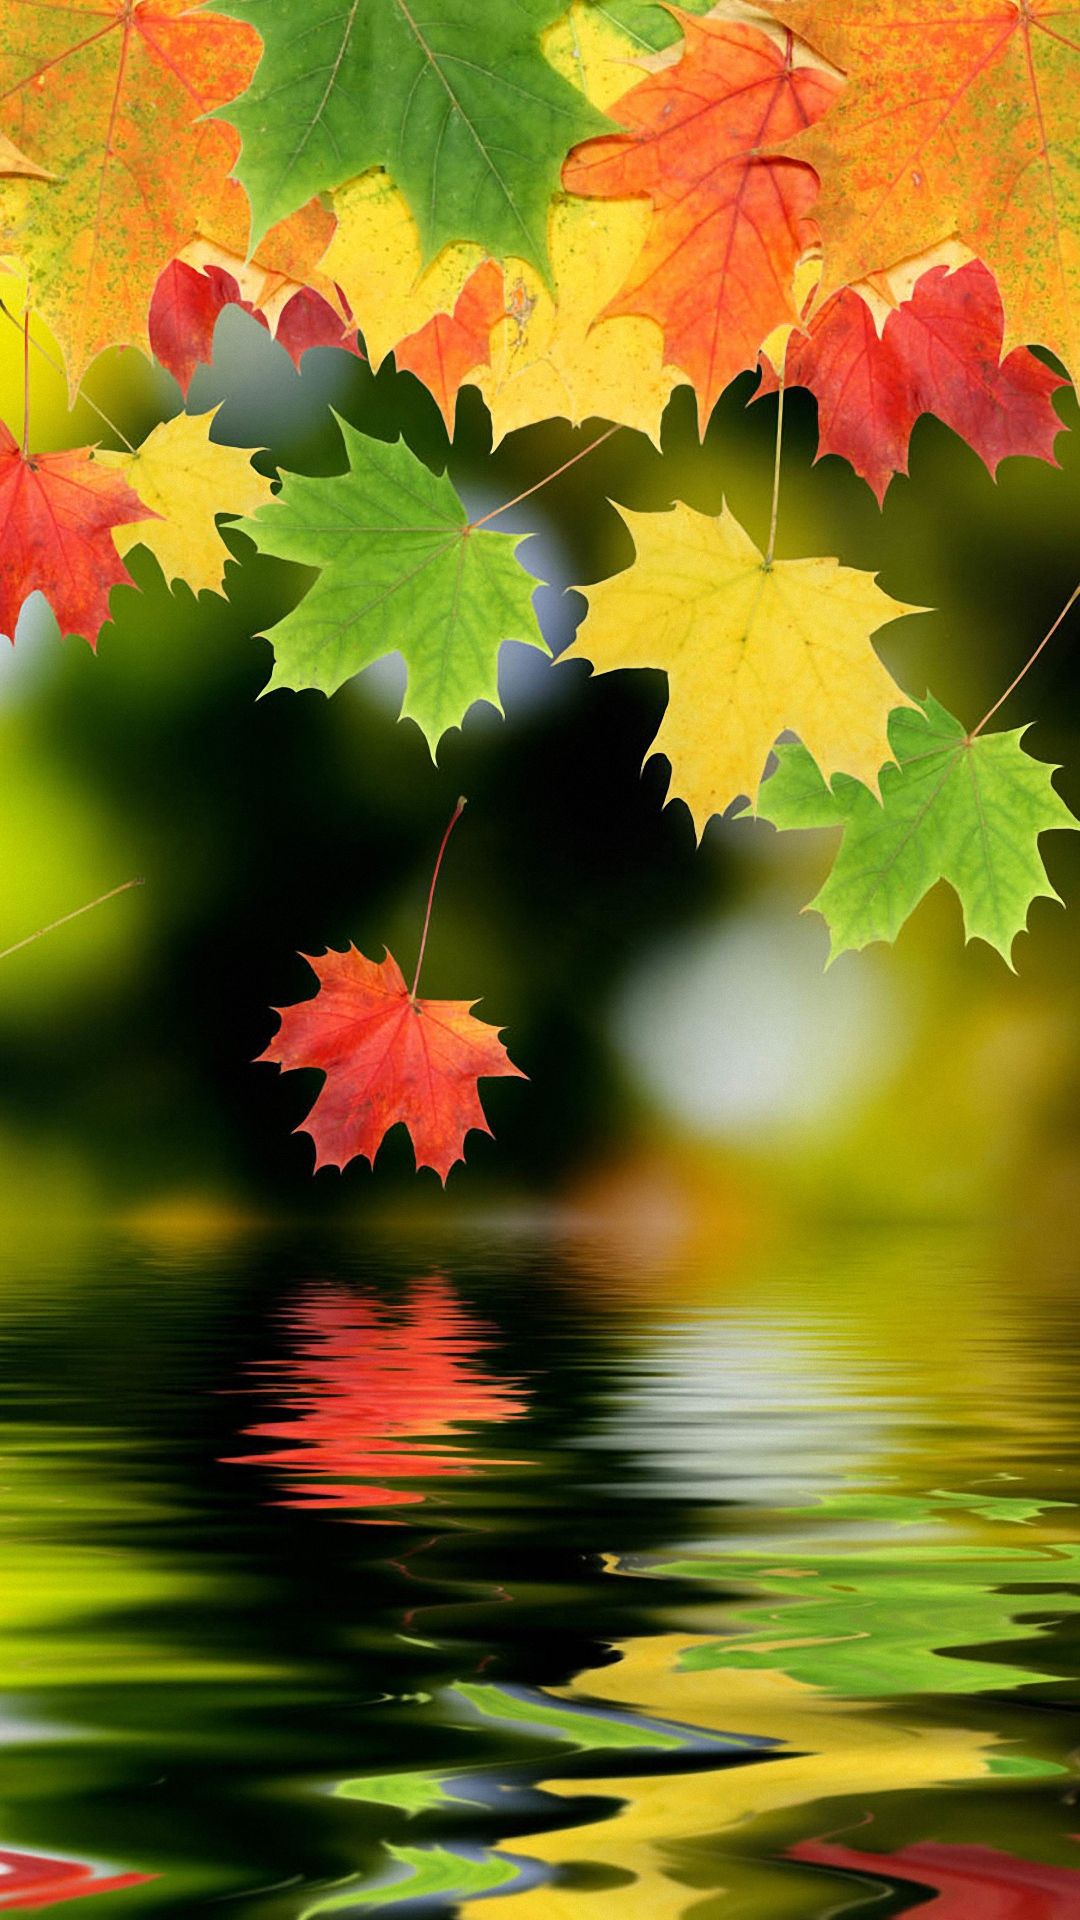 Maple Leaf Android Wallpapers 1080p Phone Mobile Full - 1080p Hd Wallpaper Download - HD Wallpaper 